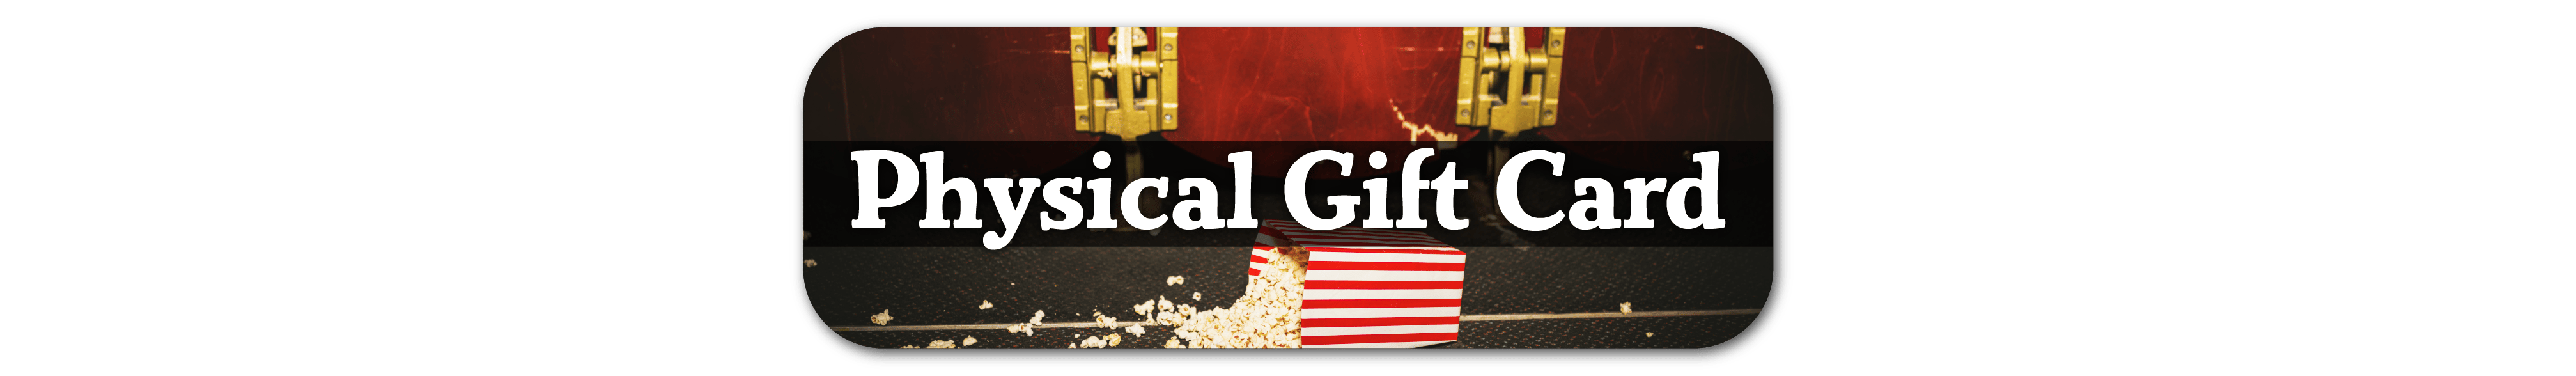 physical gift card banner